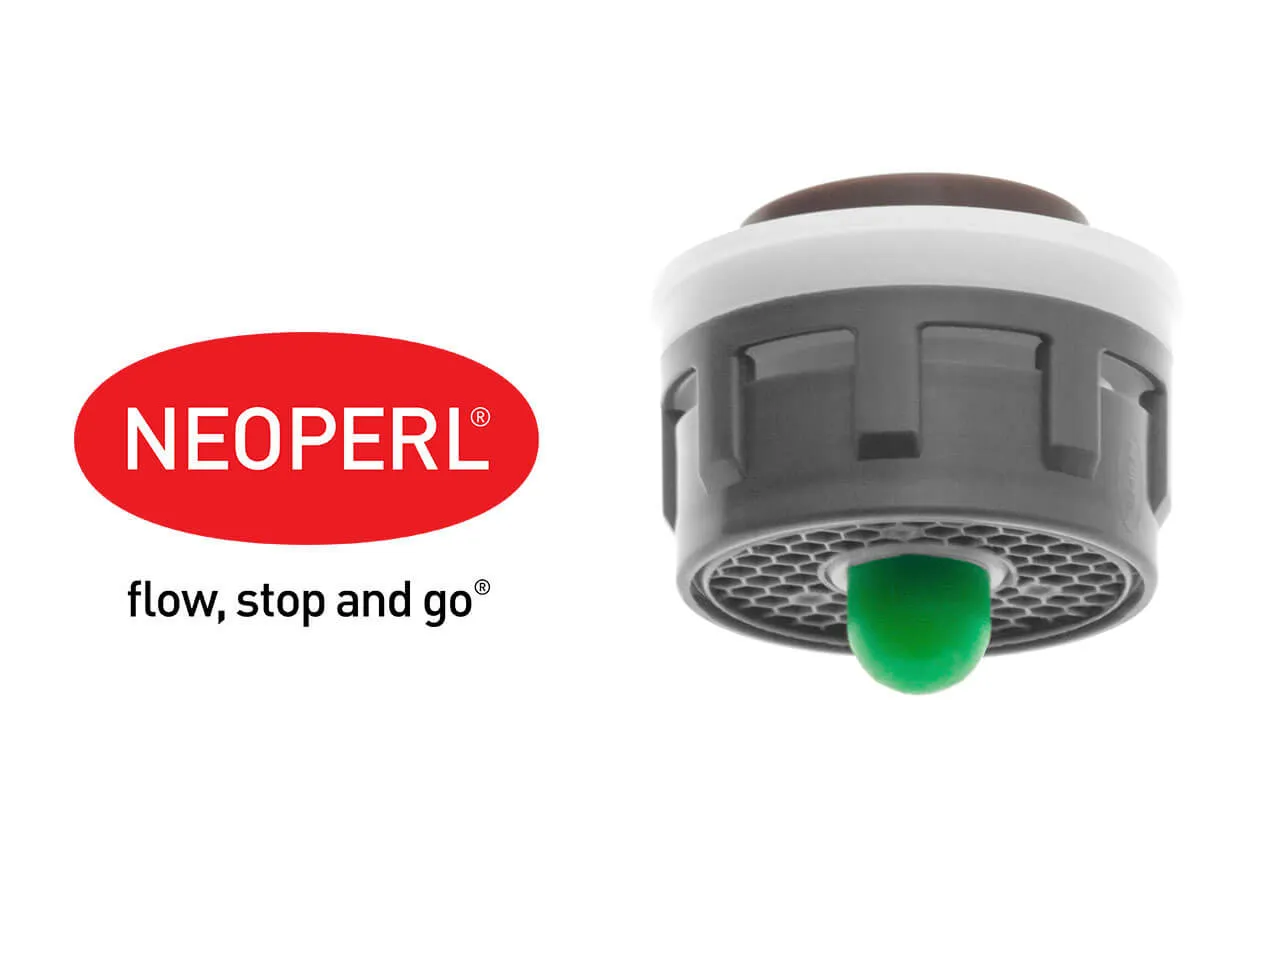 Neoperl Push aerator insert with button - 5 or 11 l/min